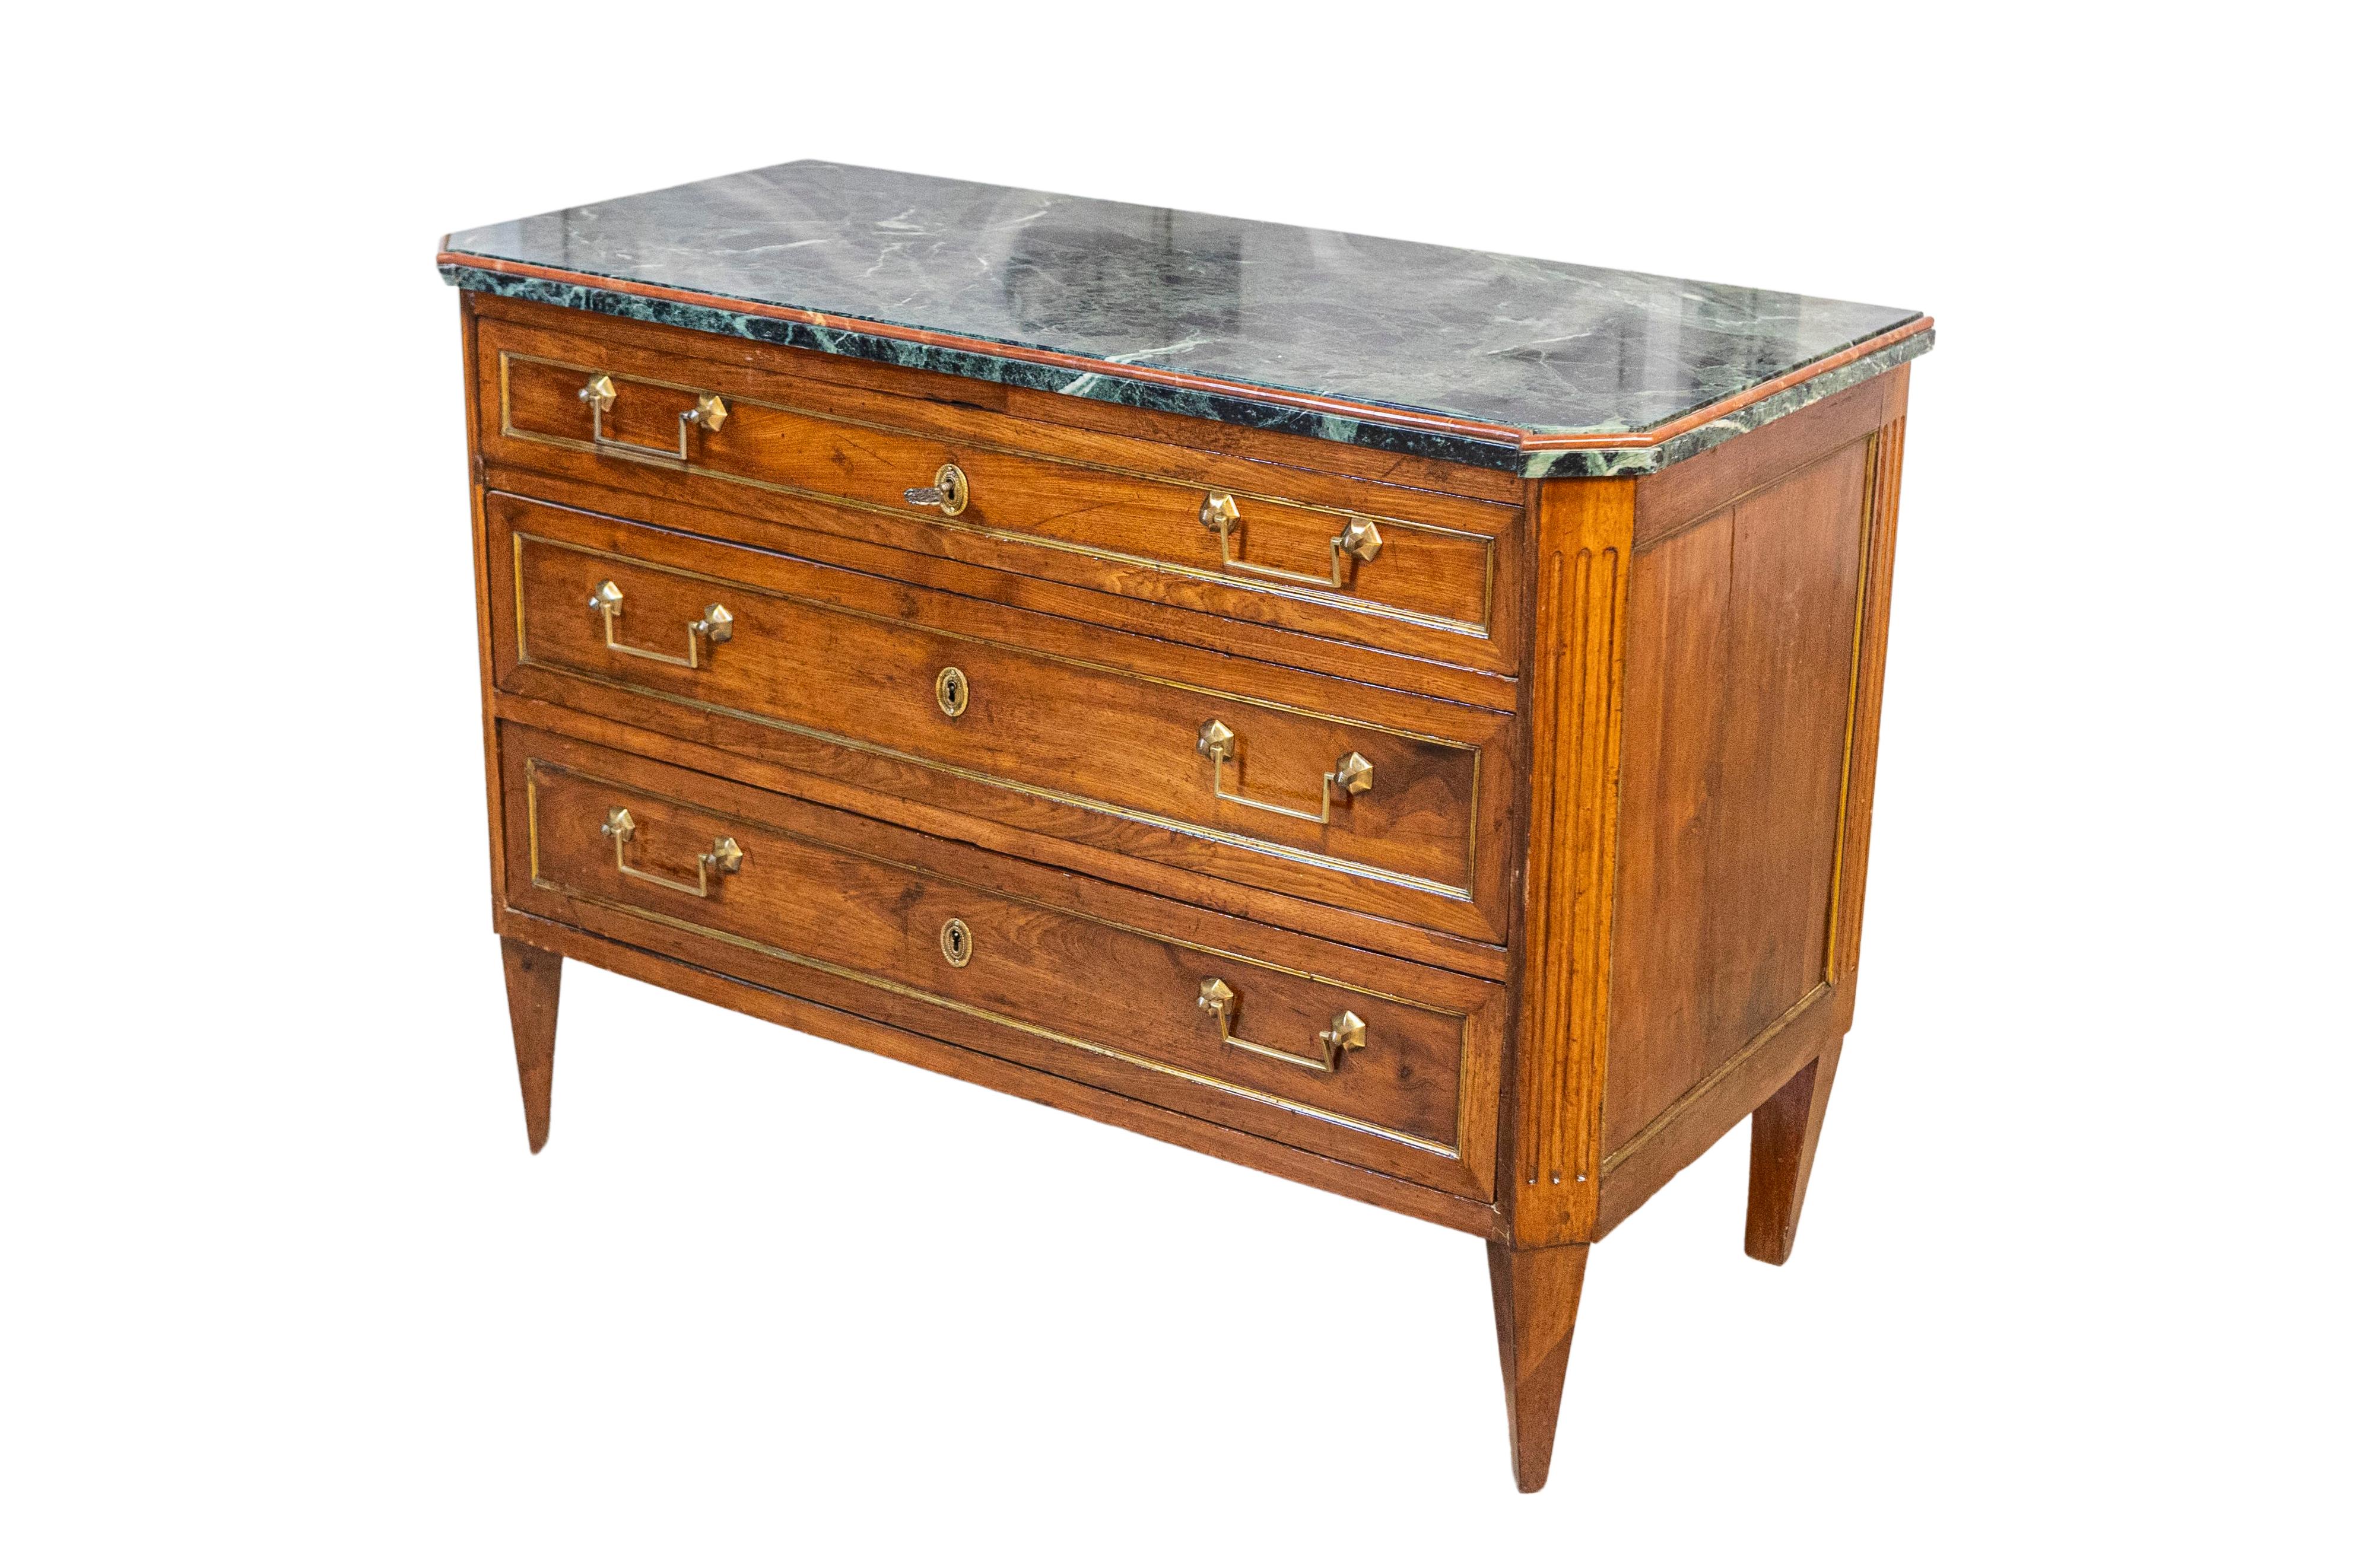 Neoclassical Italian Piemontese 1890s Three-Drawer Walnut Commode with Dark Green Marble Top For Sale